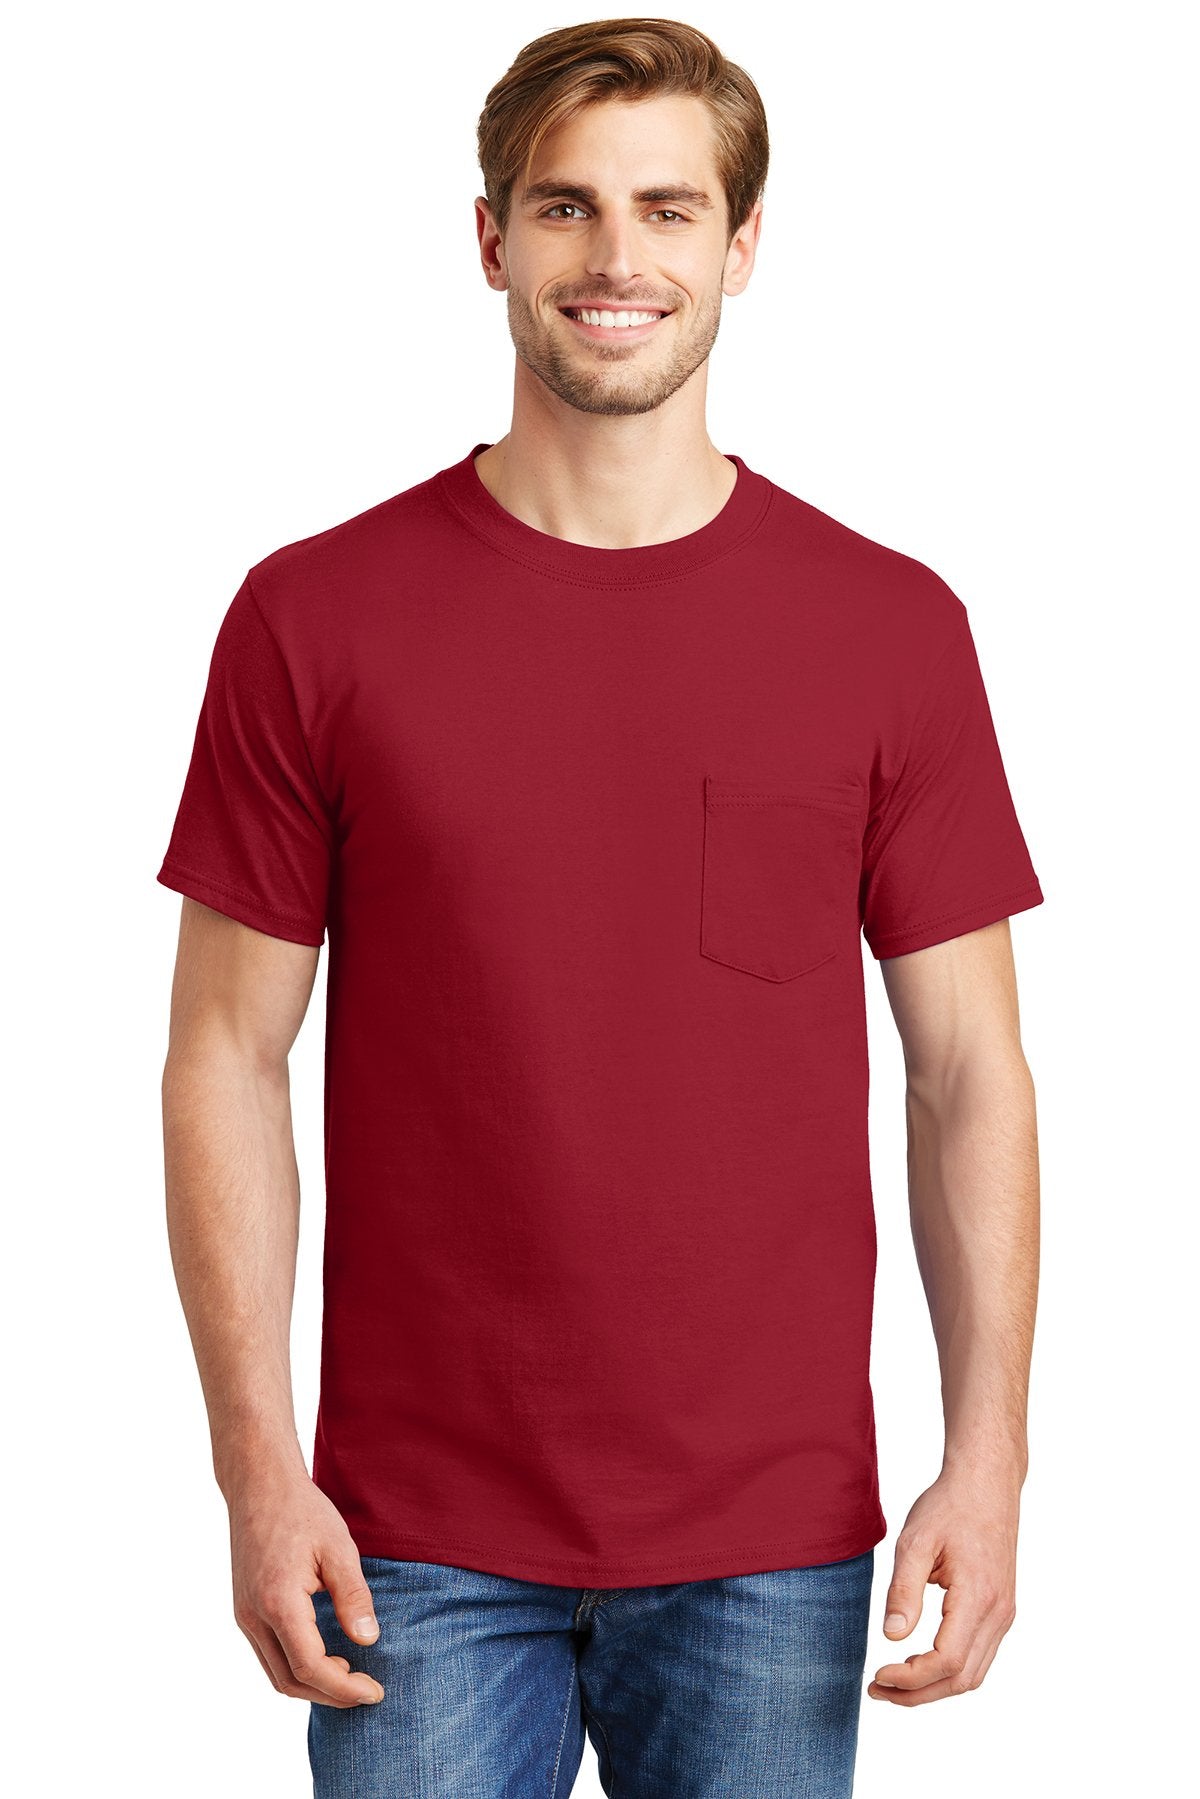 hanes beefy cotton t shirt with pocket 5190 deep red